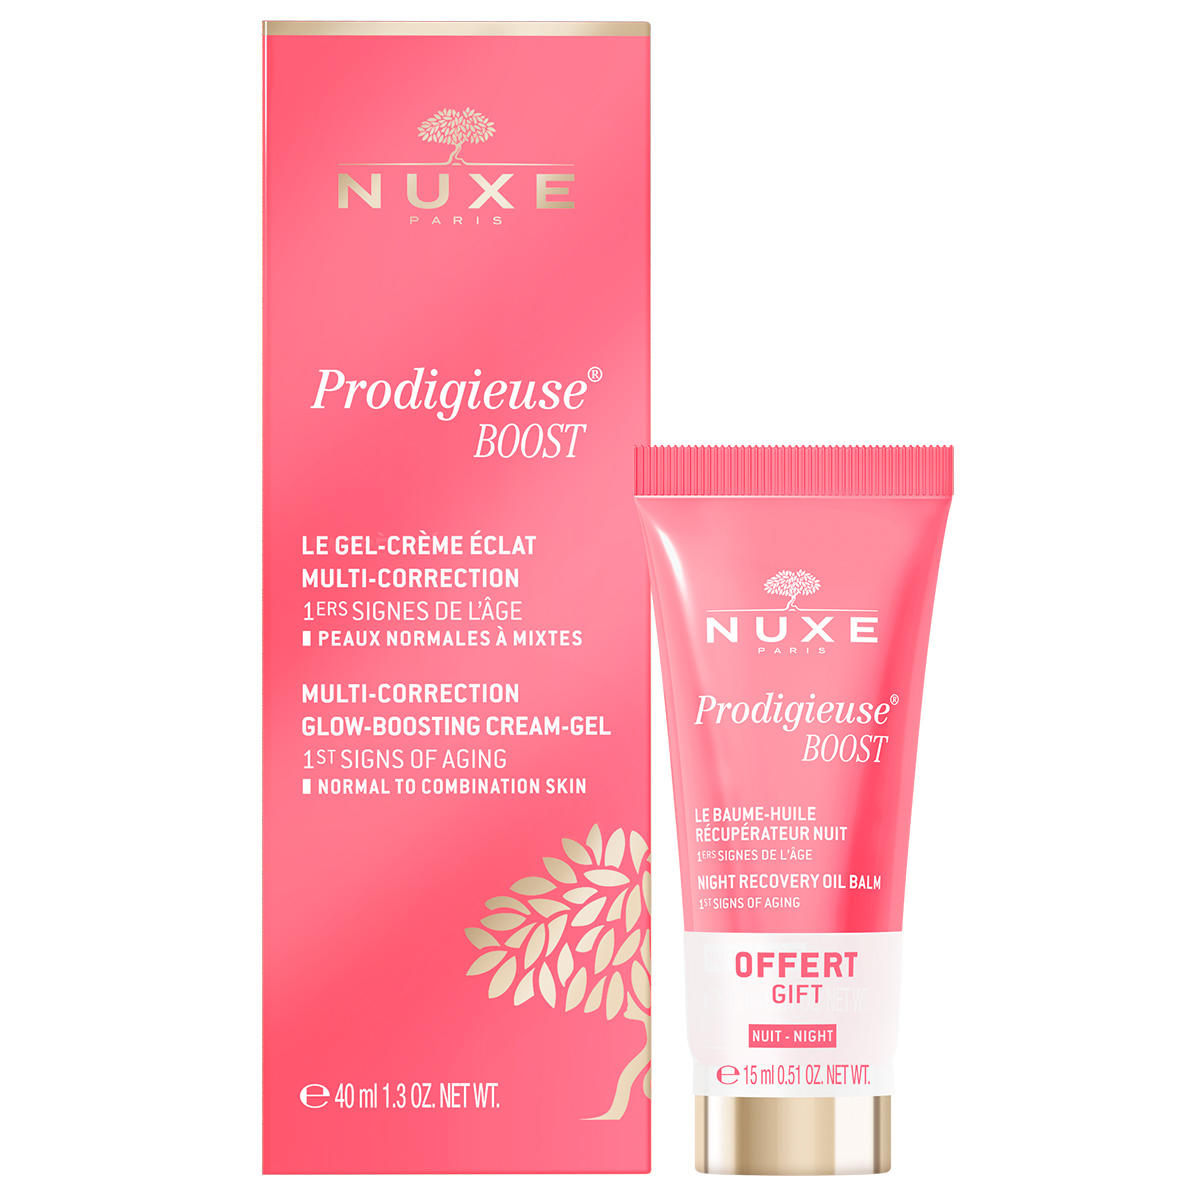 nuxe prodigieuse boost cream-gel and oil balm set